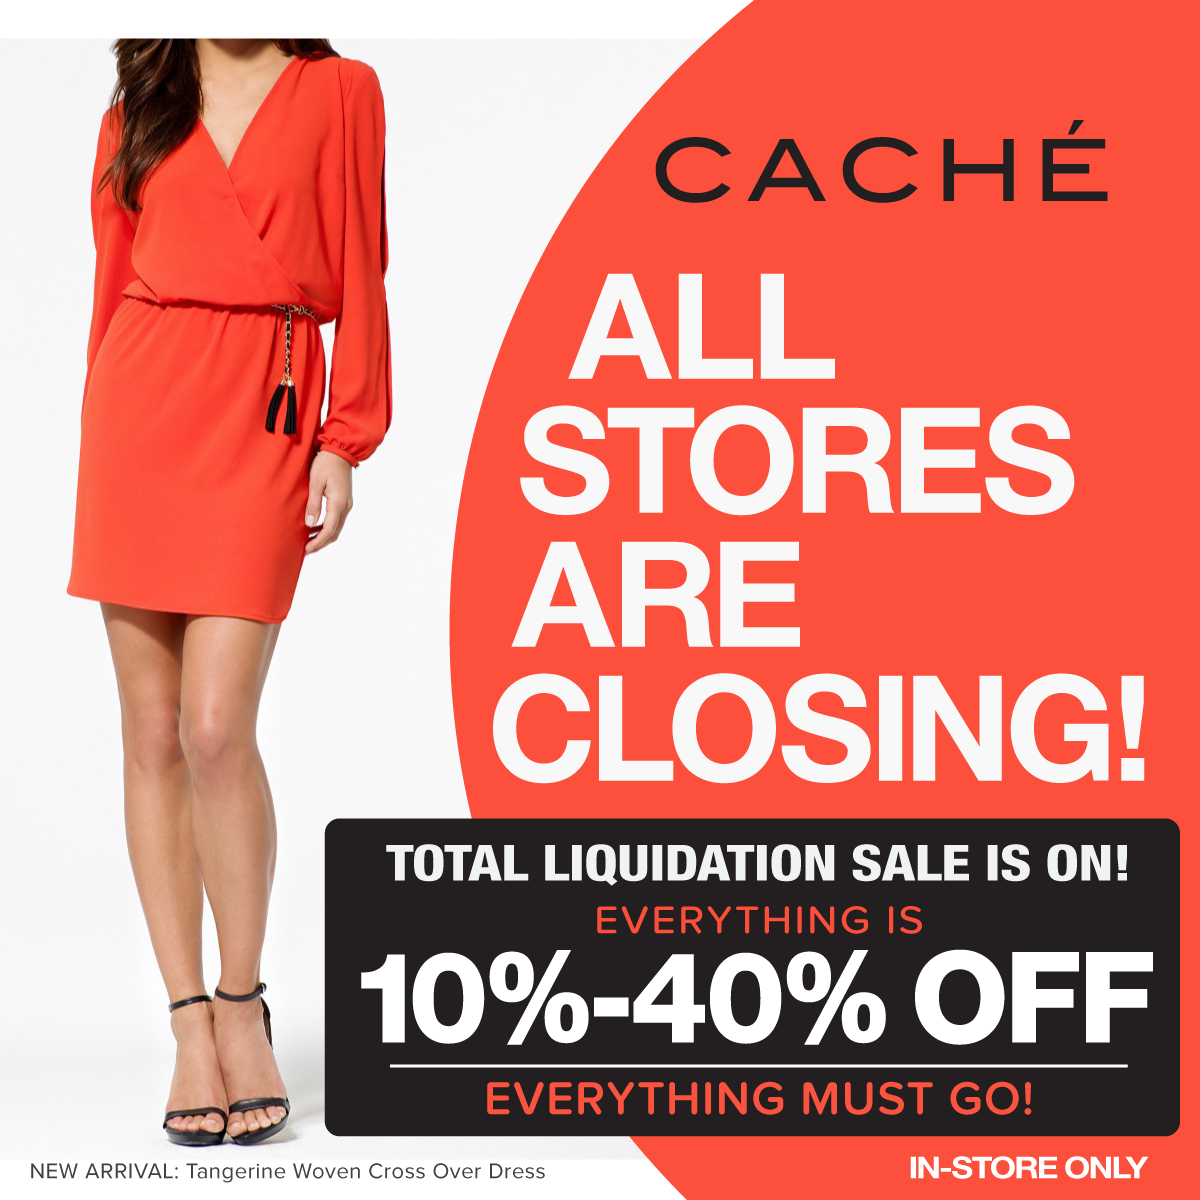 Caché To Liquidate, Close All Remaining Stores